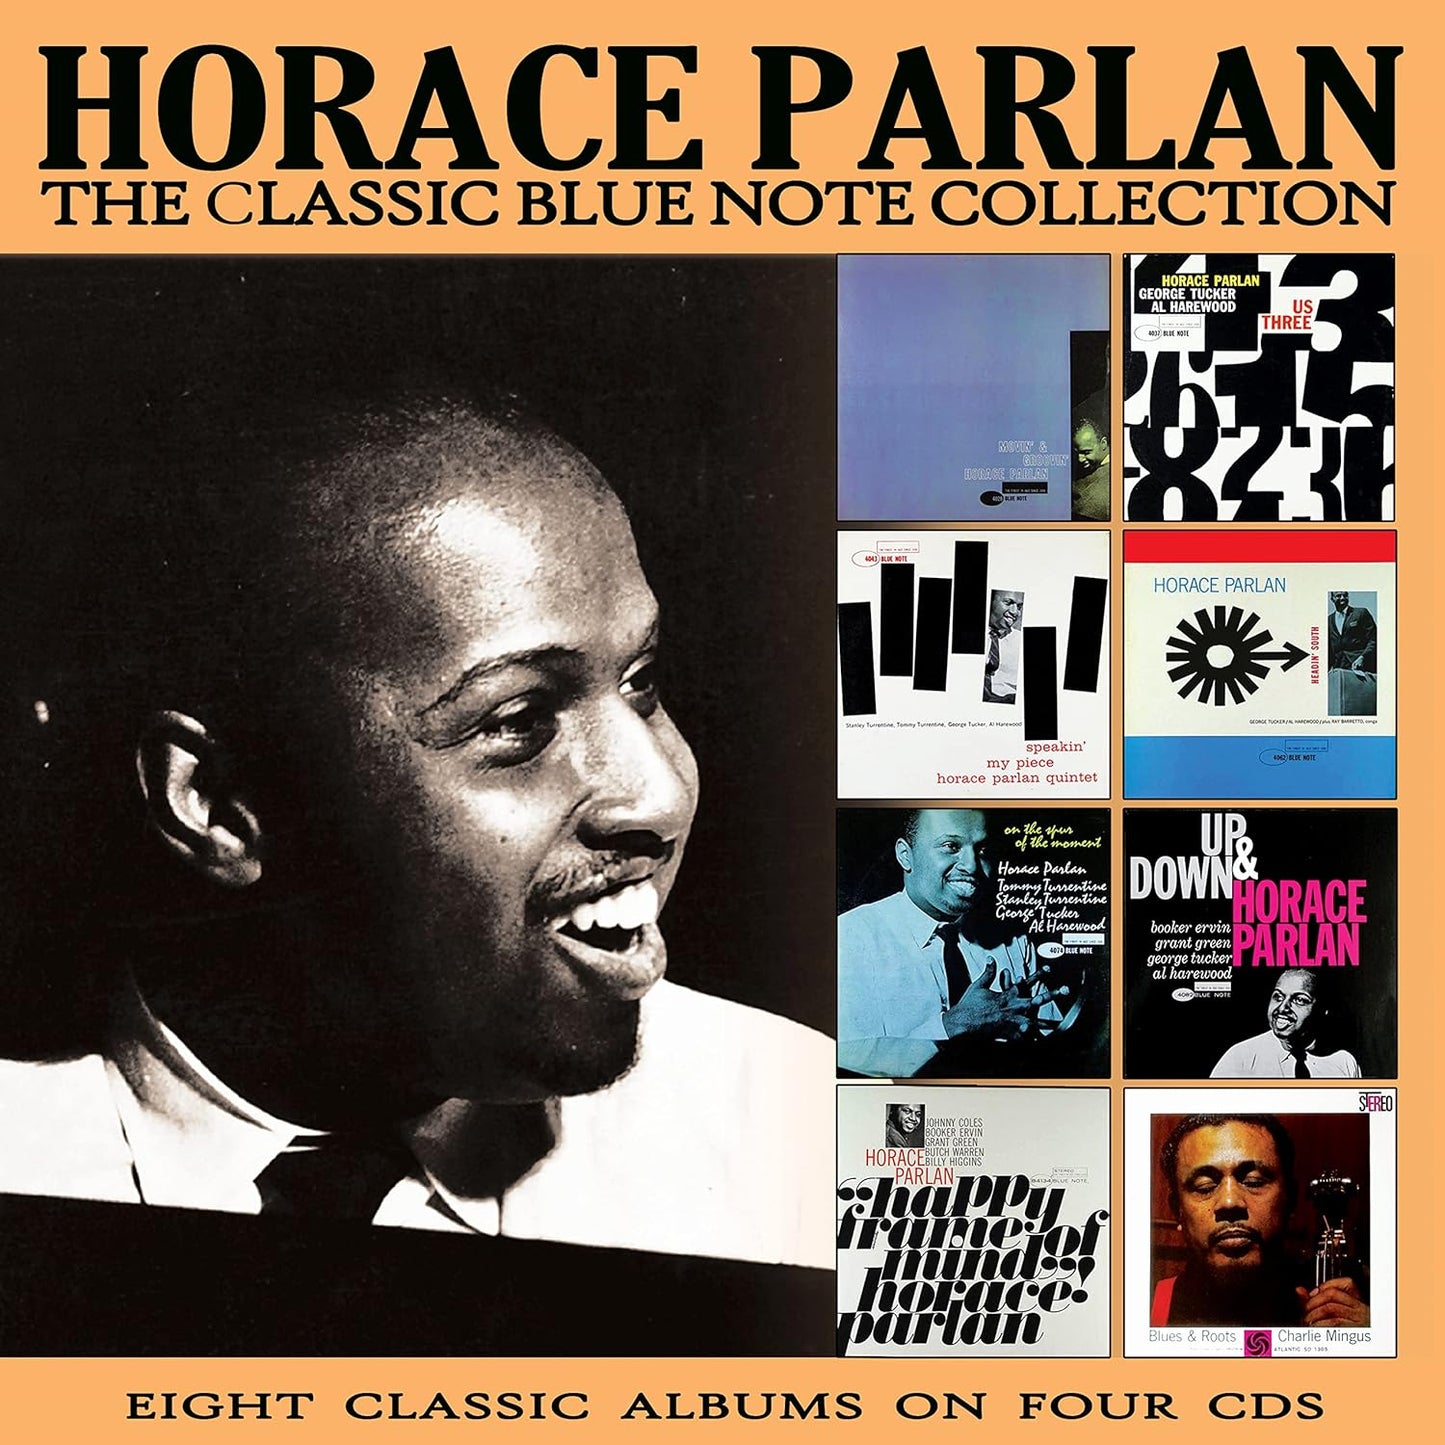 HORACE PARLAN: The Classic Blue Note Collection (4 CDS)